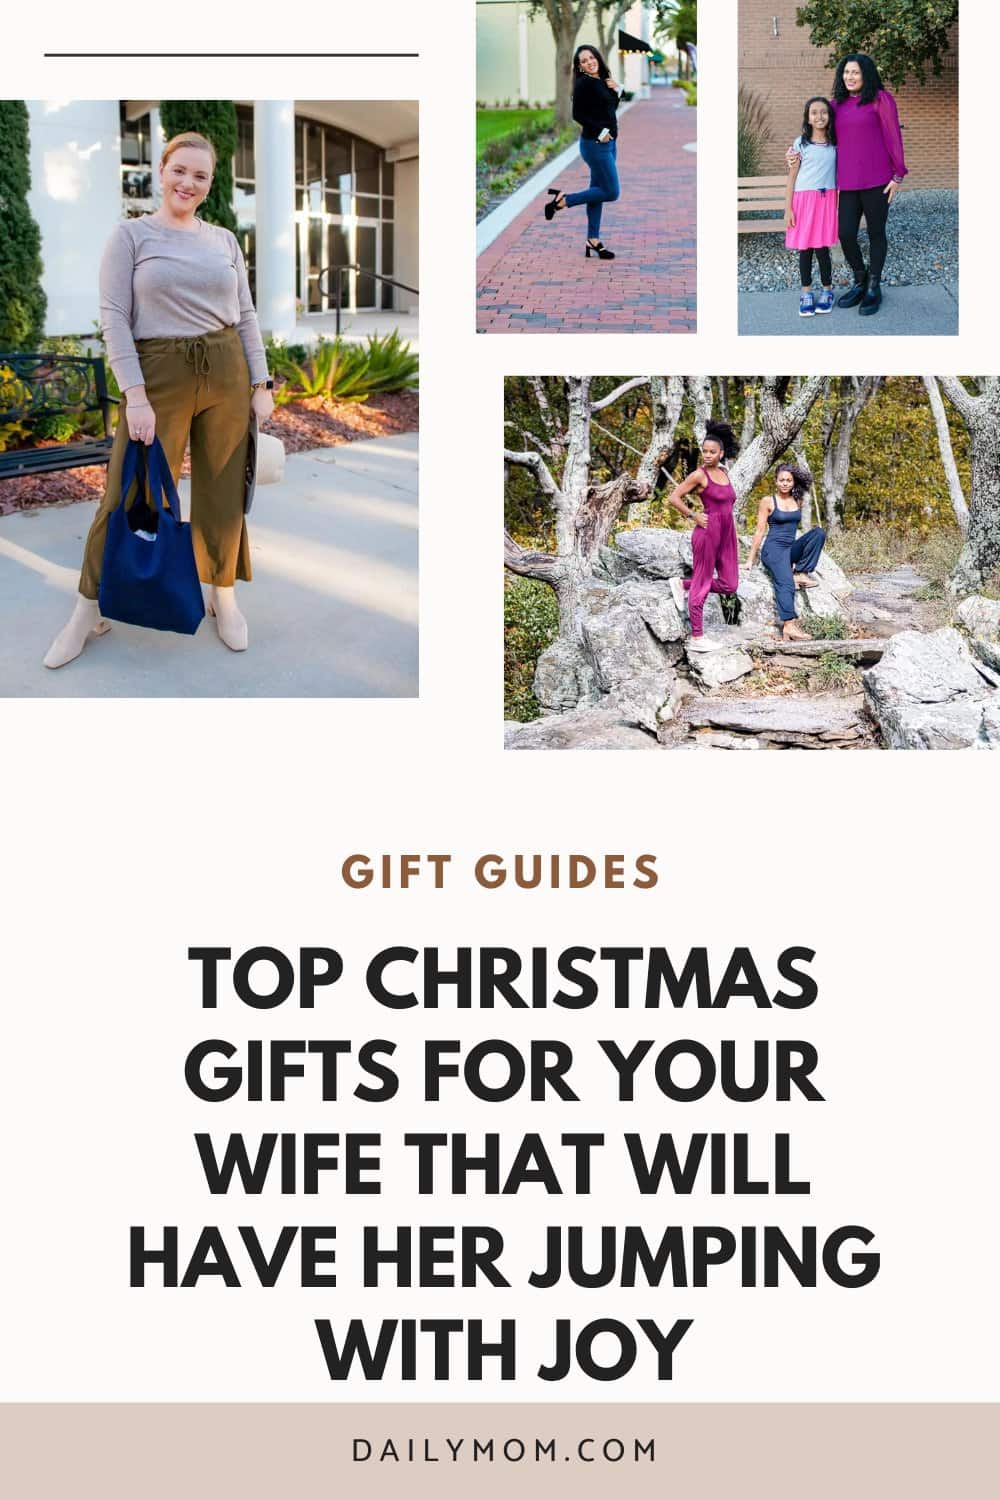 20 Top Christmas Gifts For Your Wife That Will Have Her Jumping With Joy 117 Daily Mom, Magazine For Families